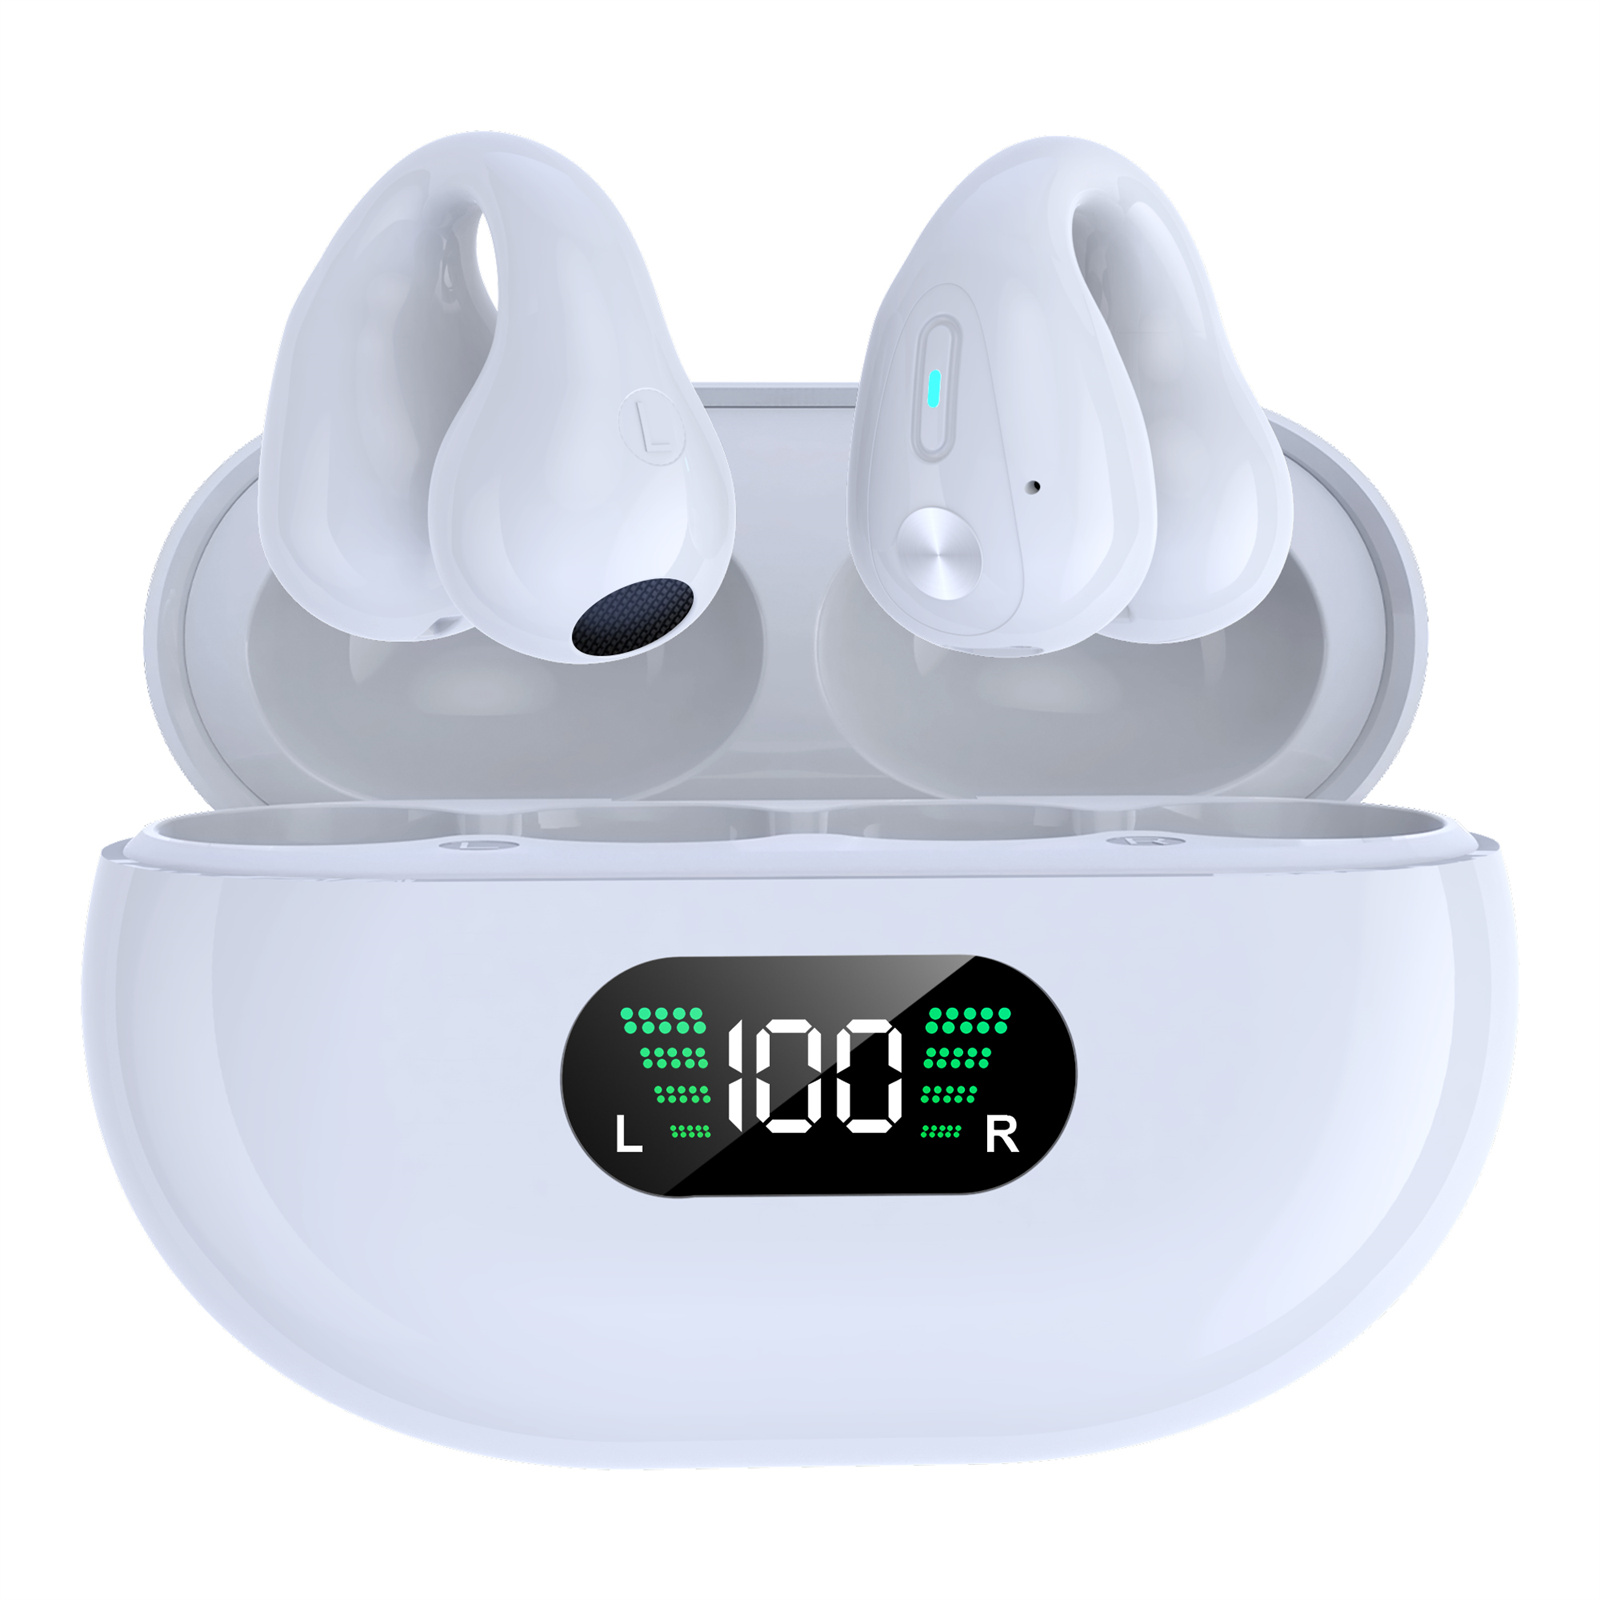 Q80 Wireless Ear Clip Open Ear Headphones Sports Earphones With Built-in Mic Power Display Charging Case Earbuds White